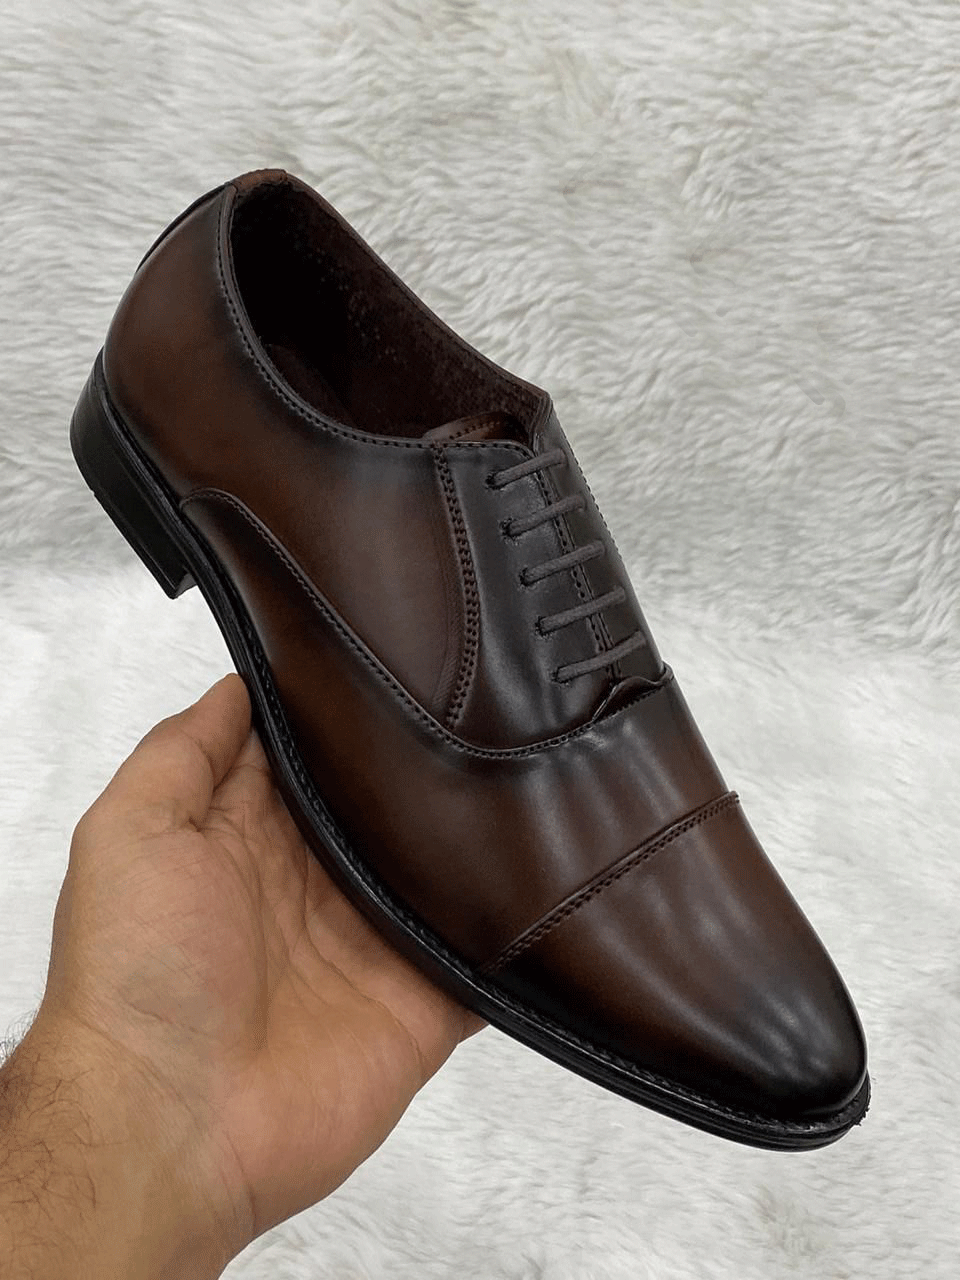 Shiny Mens Wear Pattern Premium Design Quality Oxford Formal Shoes-Unique and Classy